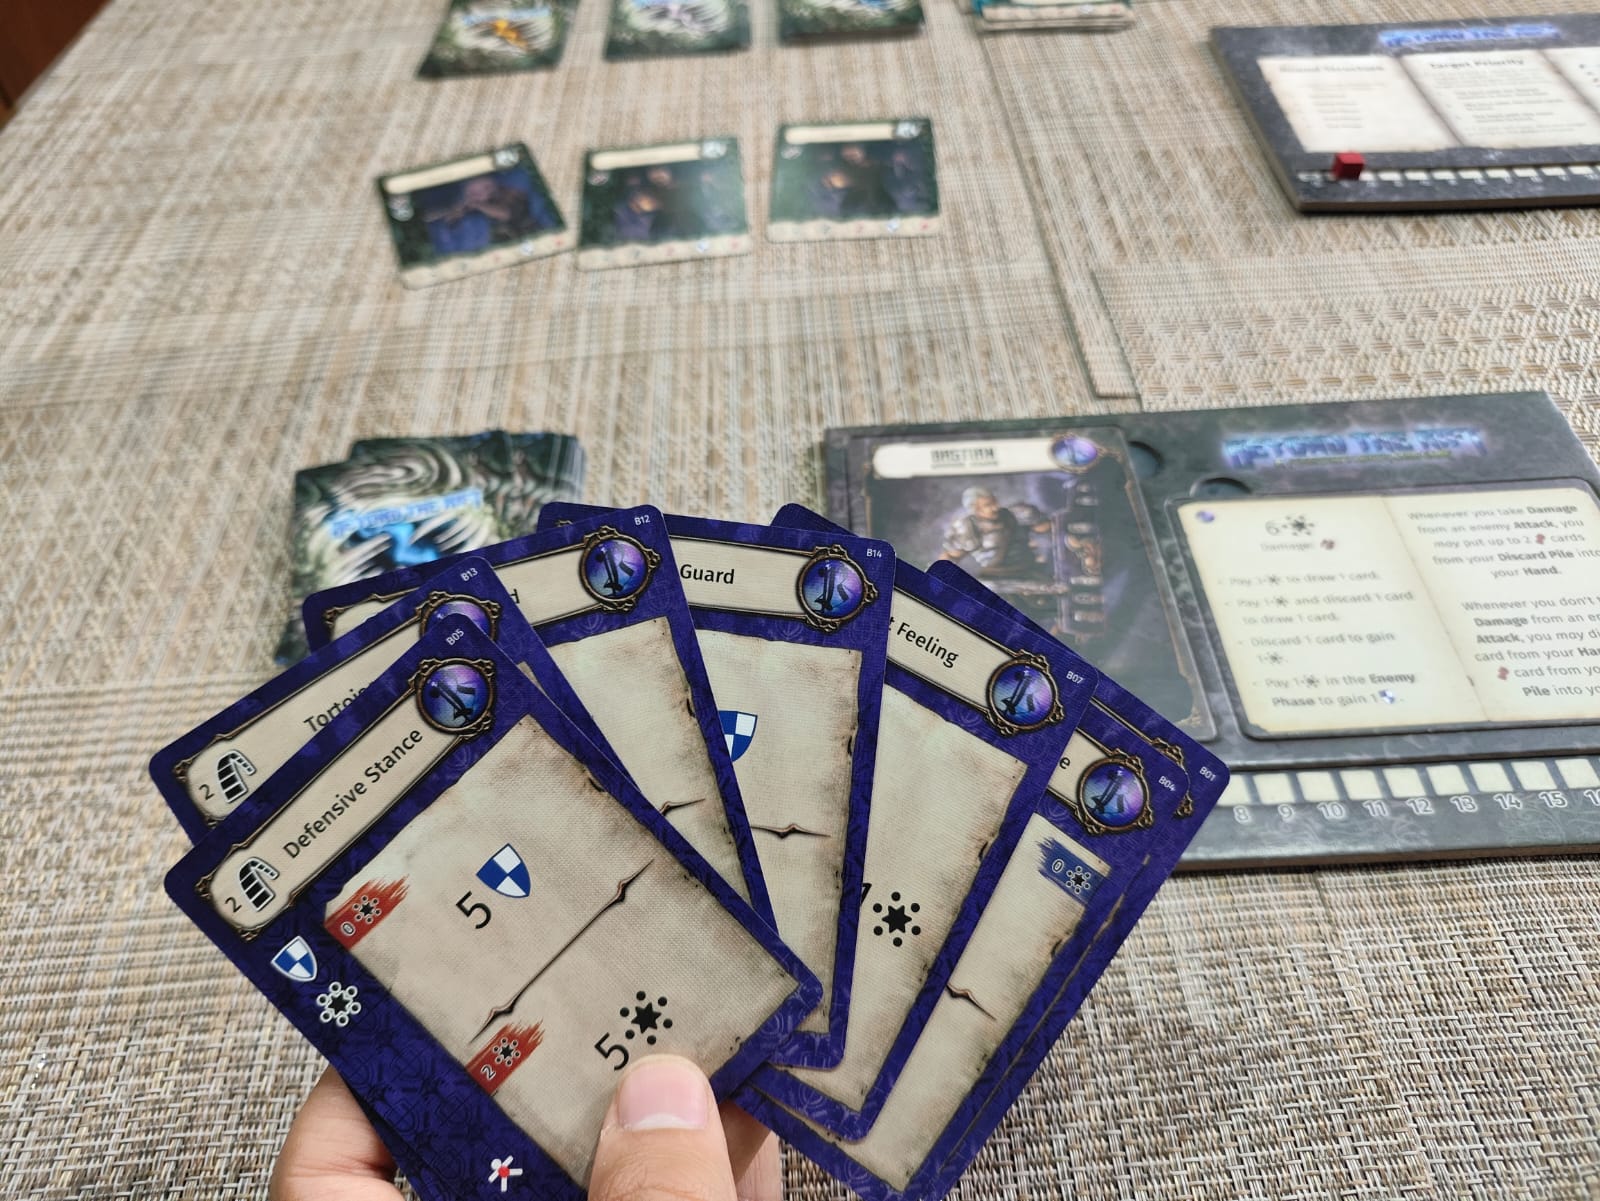 Reseña Beyond the Rift: A Perdition's Mouth Card Game 45